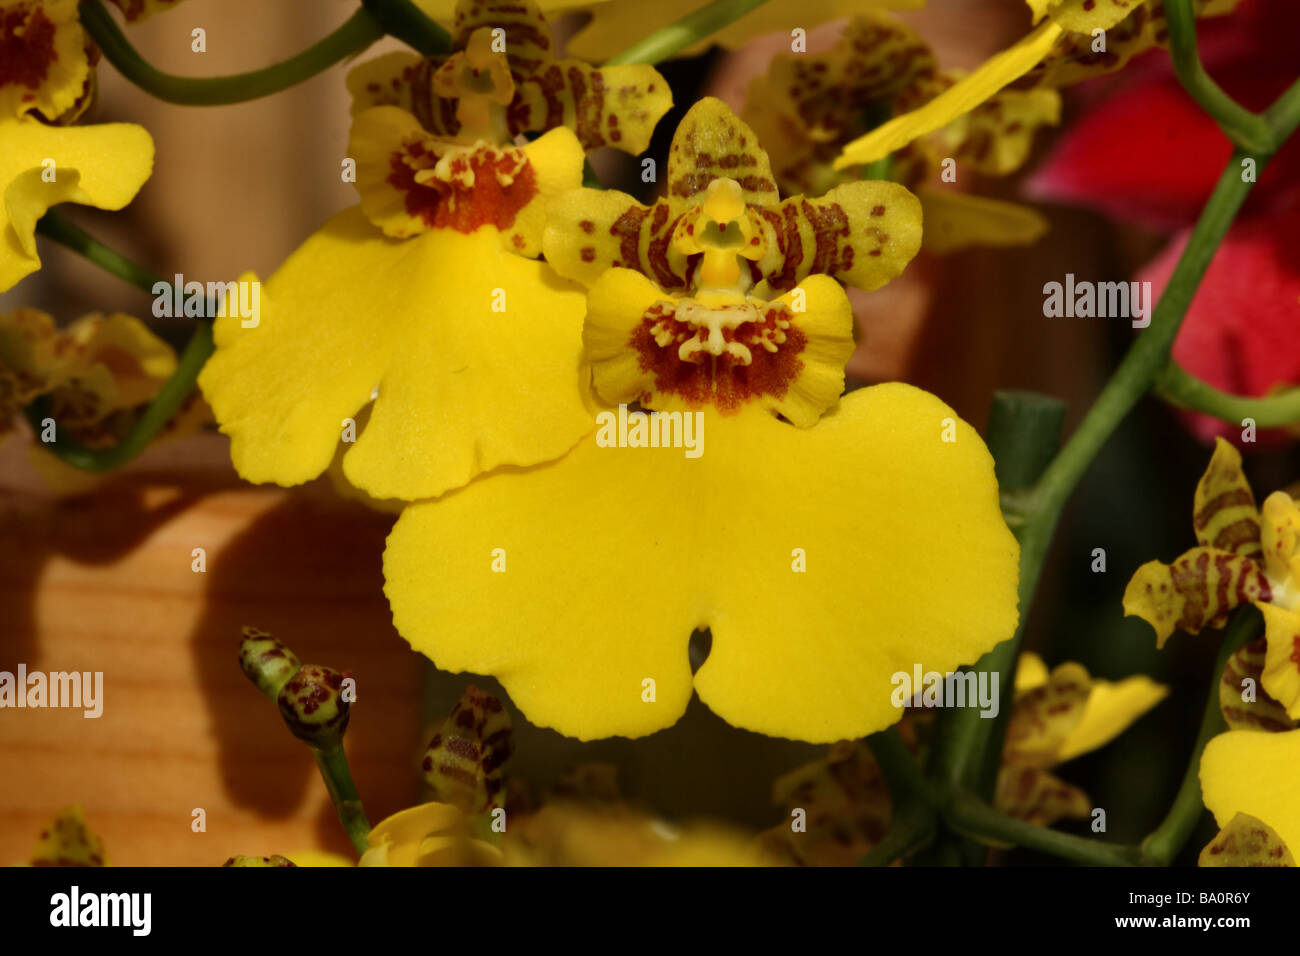 A Dancing Lady Orchid, Oncidium, yellow flower bloom in close up or  macro showing flower detail and structure Stock Photo